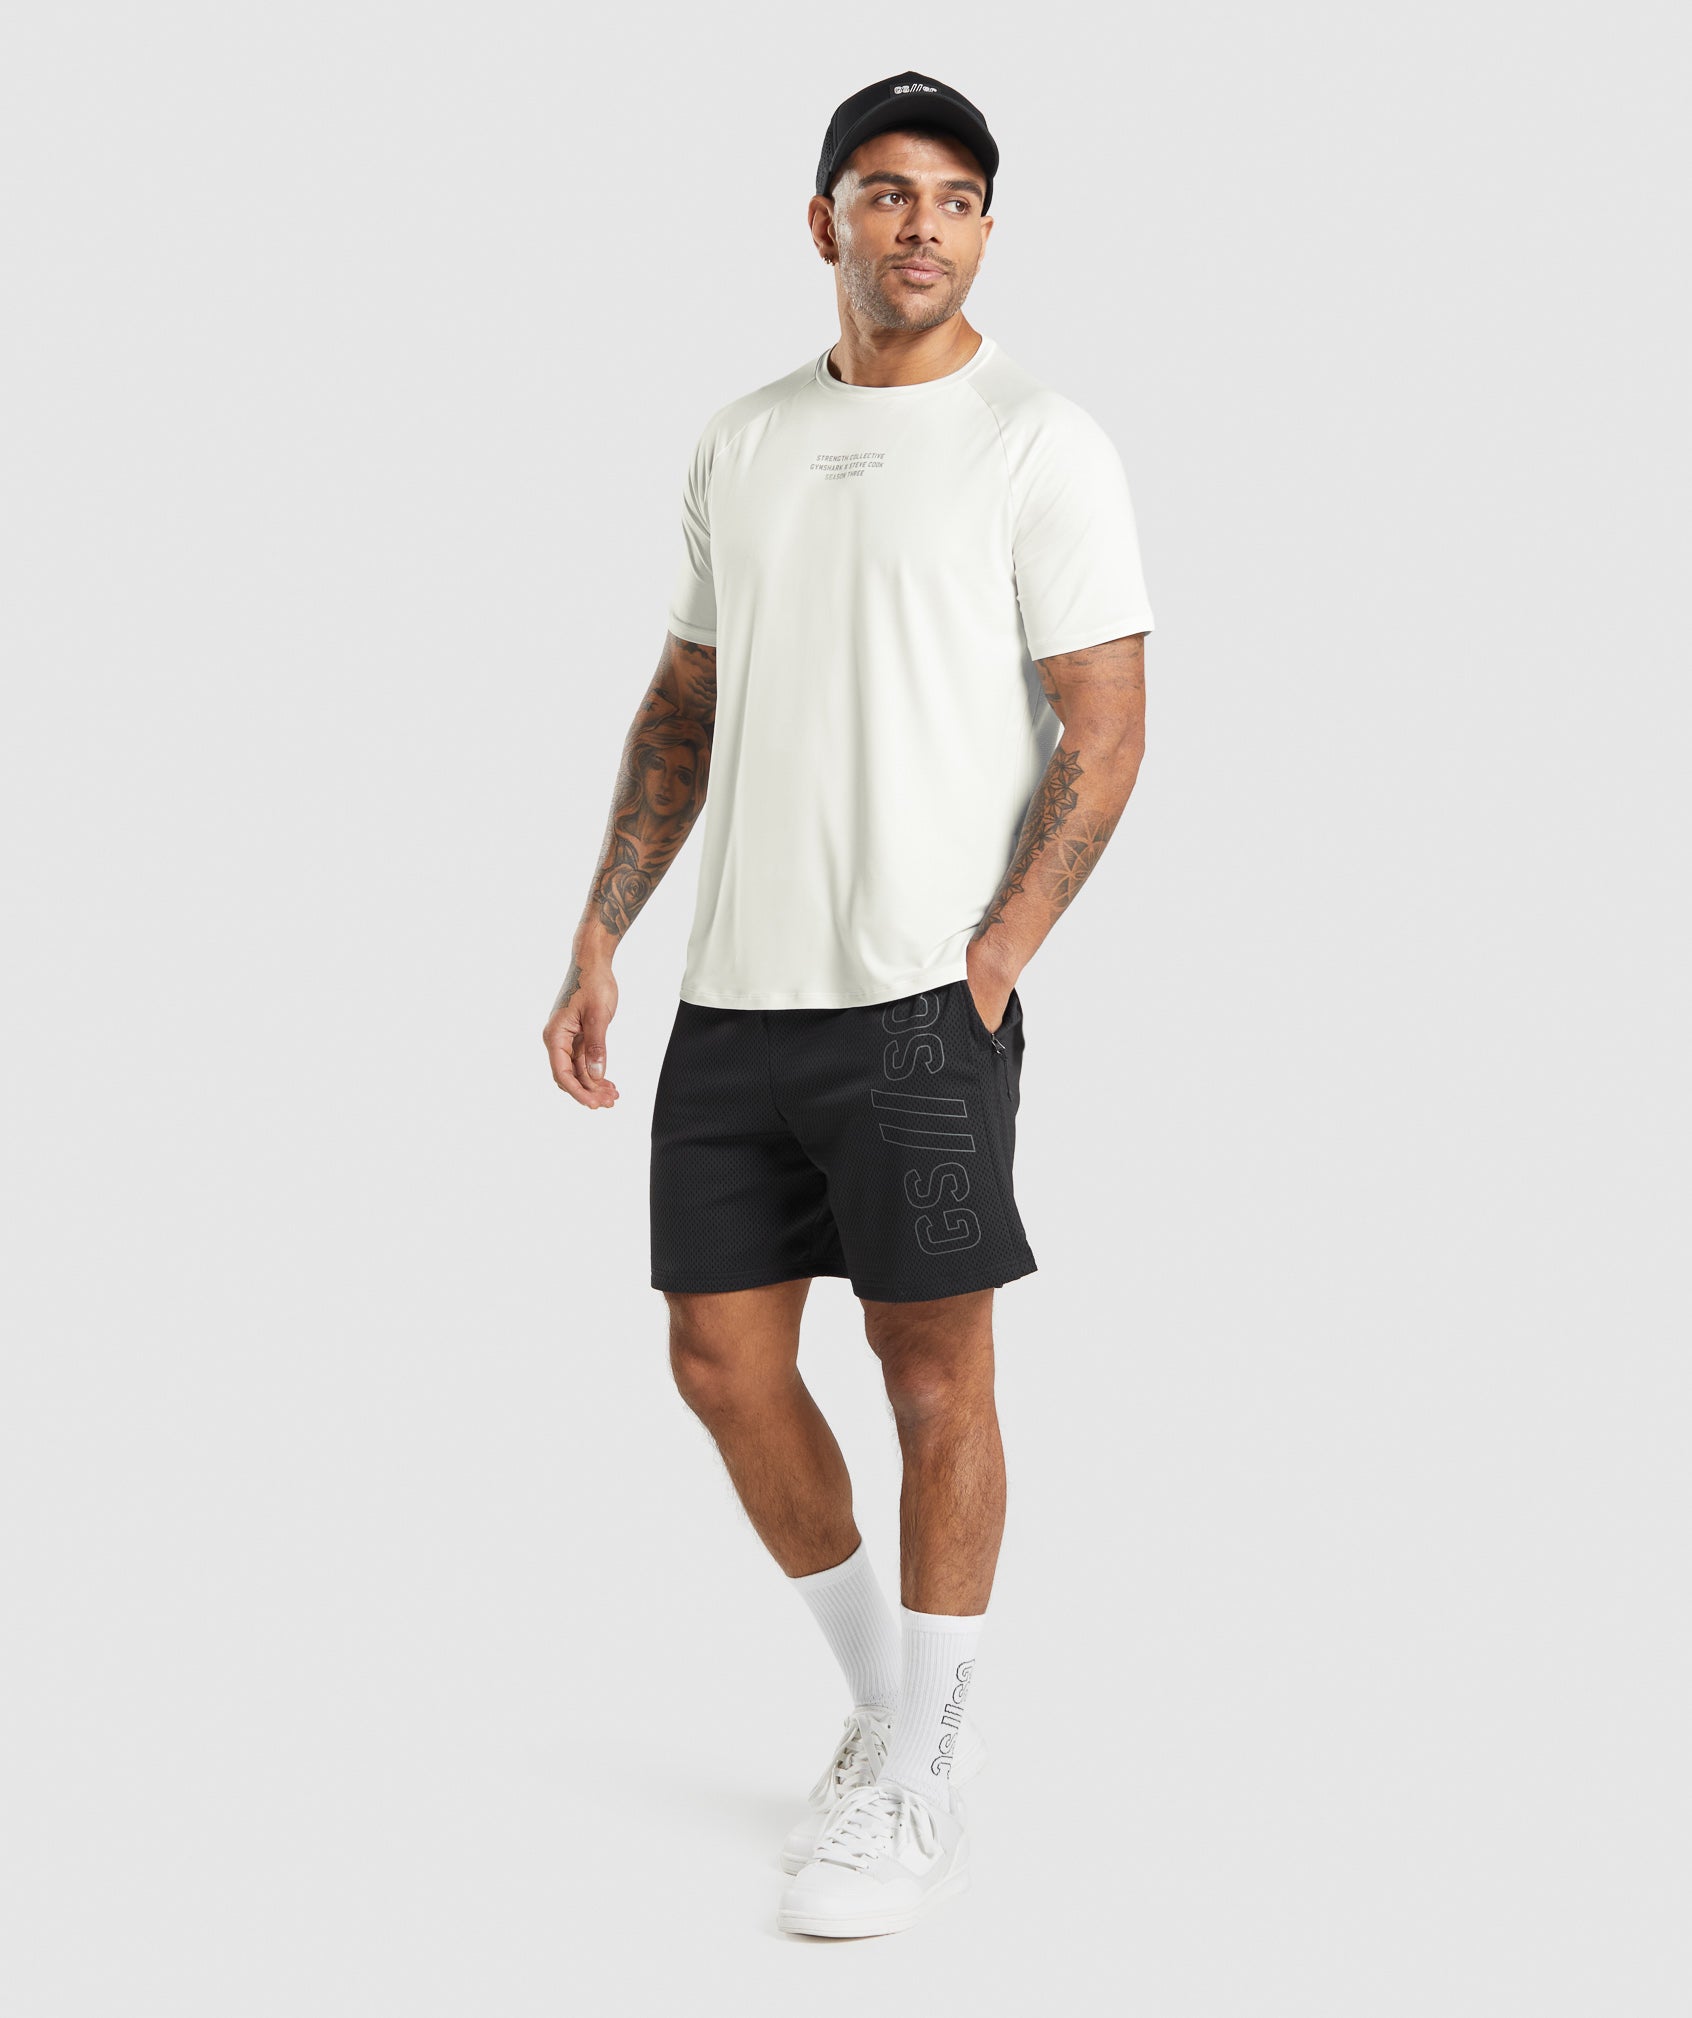 Gymshark//Steve Cook T-Shirt in Off White - view 3